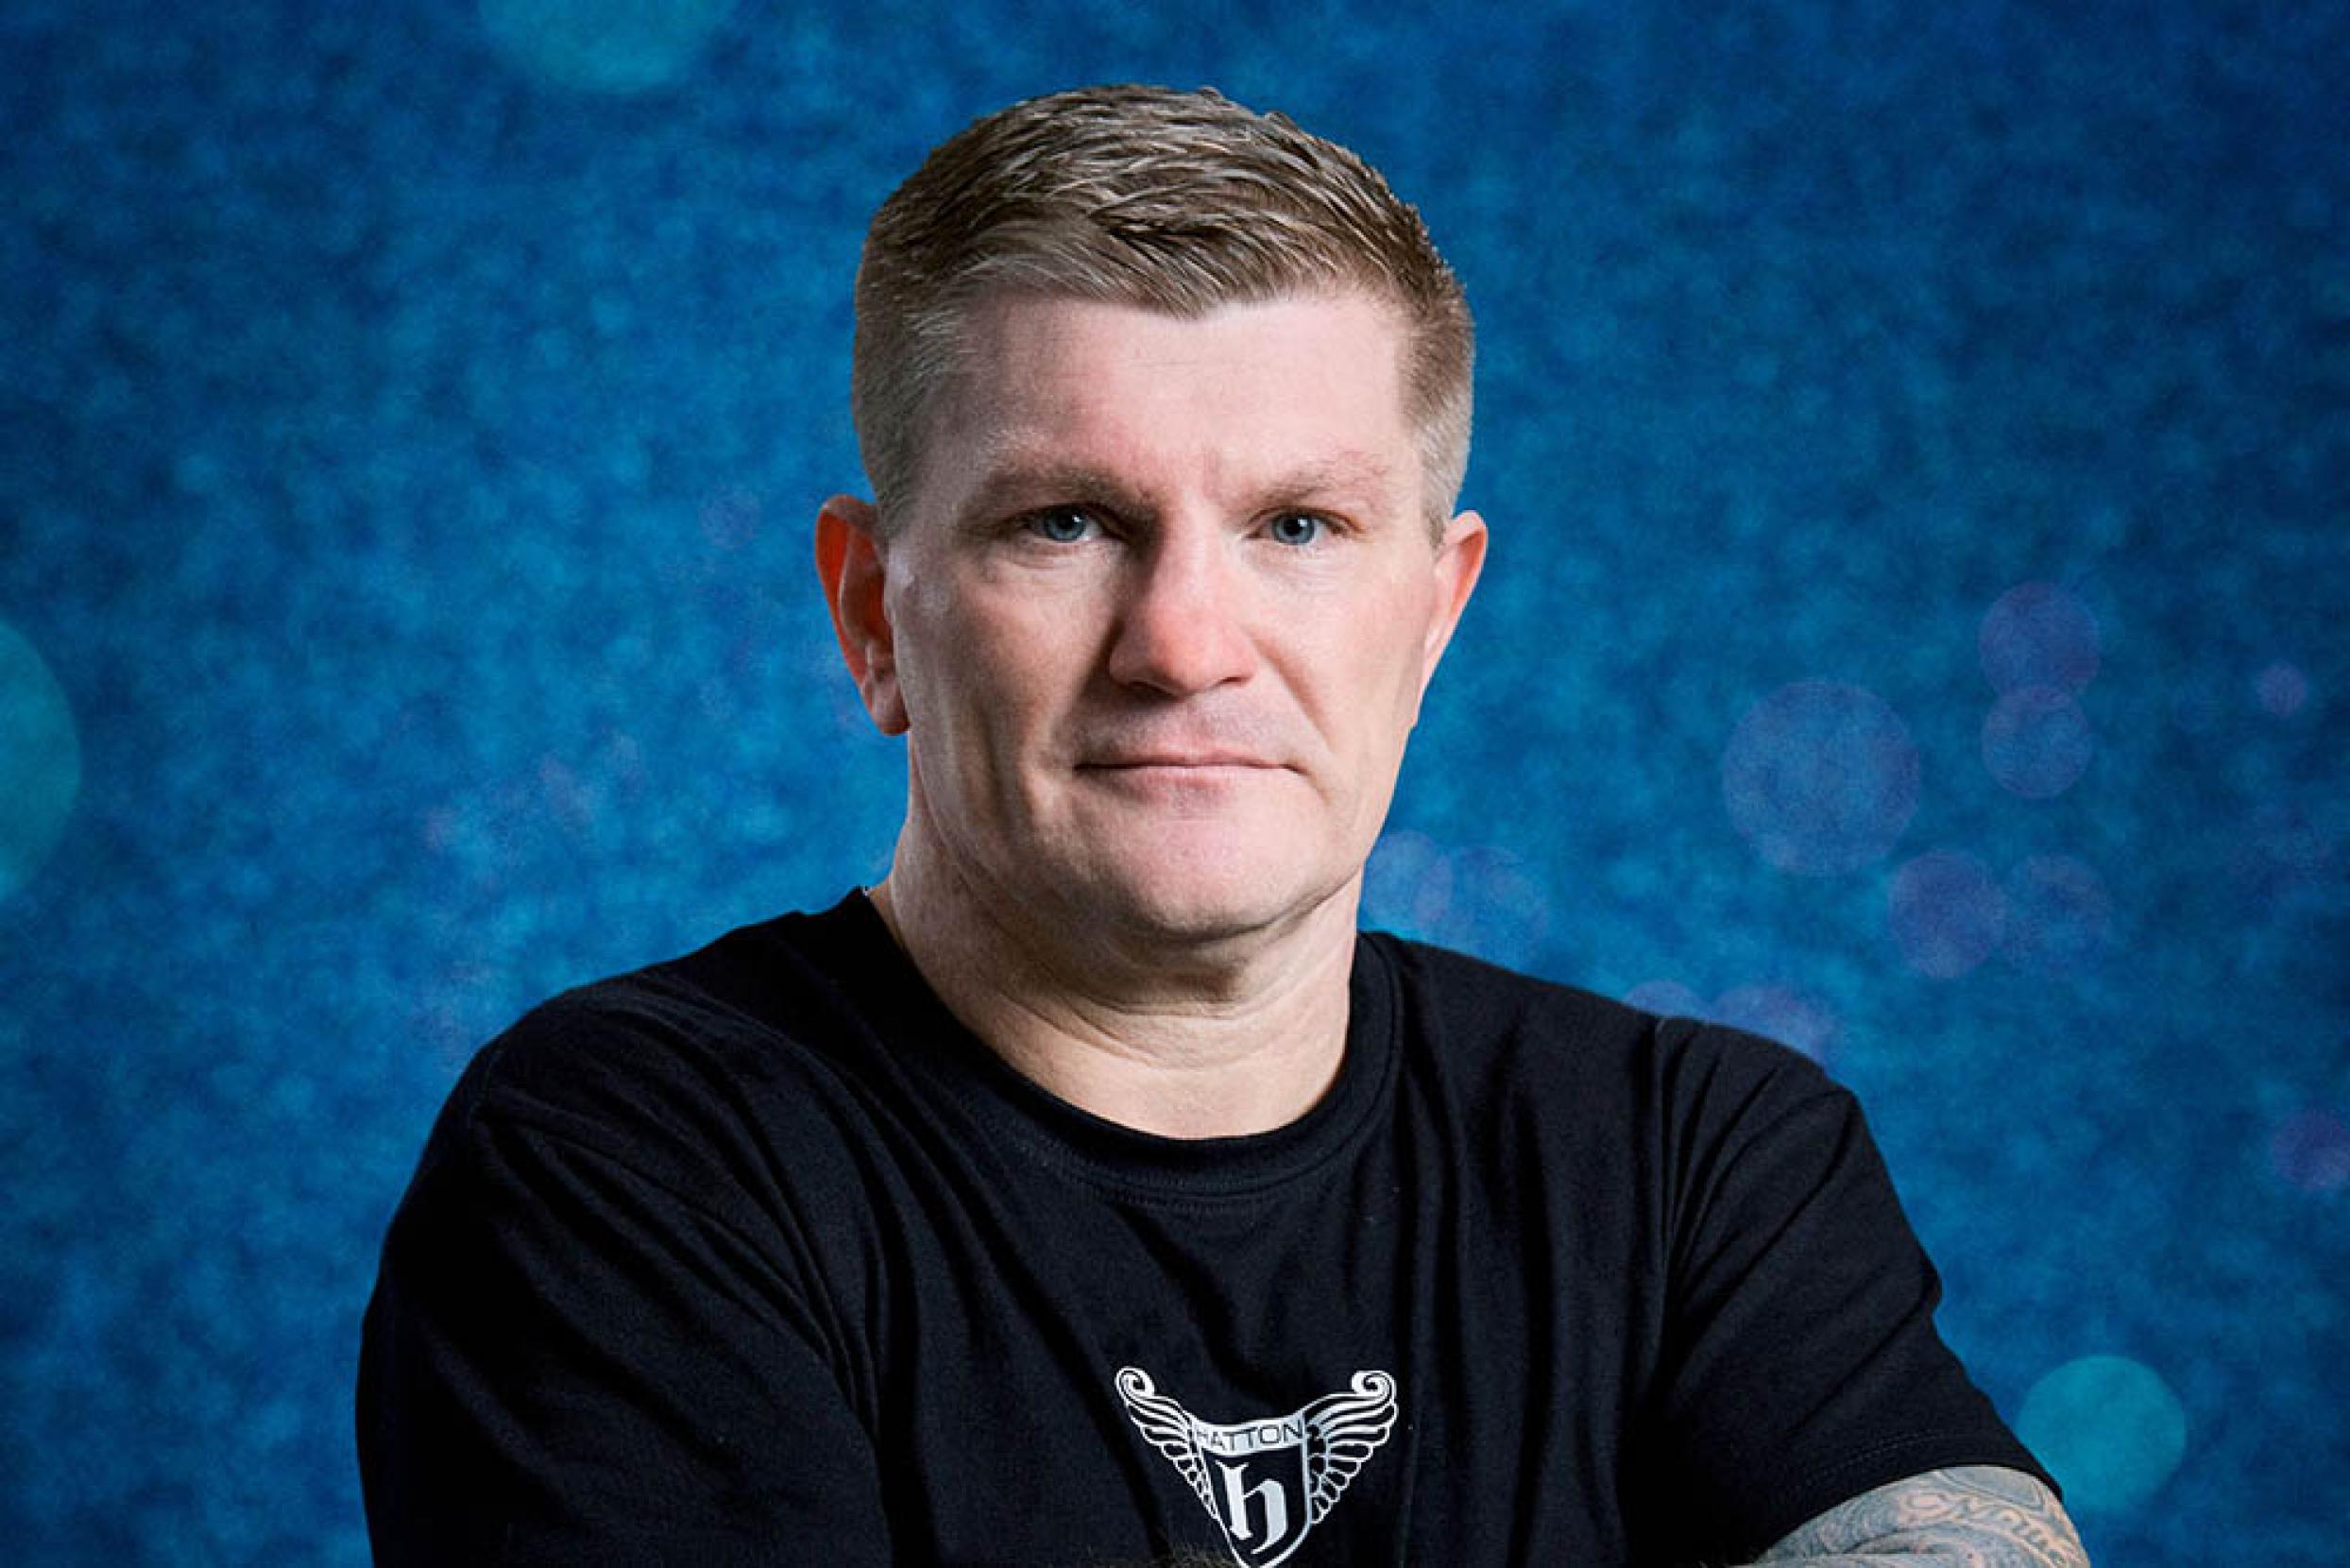 World Champion Boxer Ricky Hatton MBE is the first celebrity confirmed for Dancing on Ice